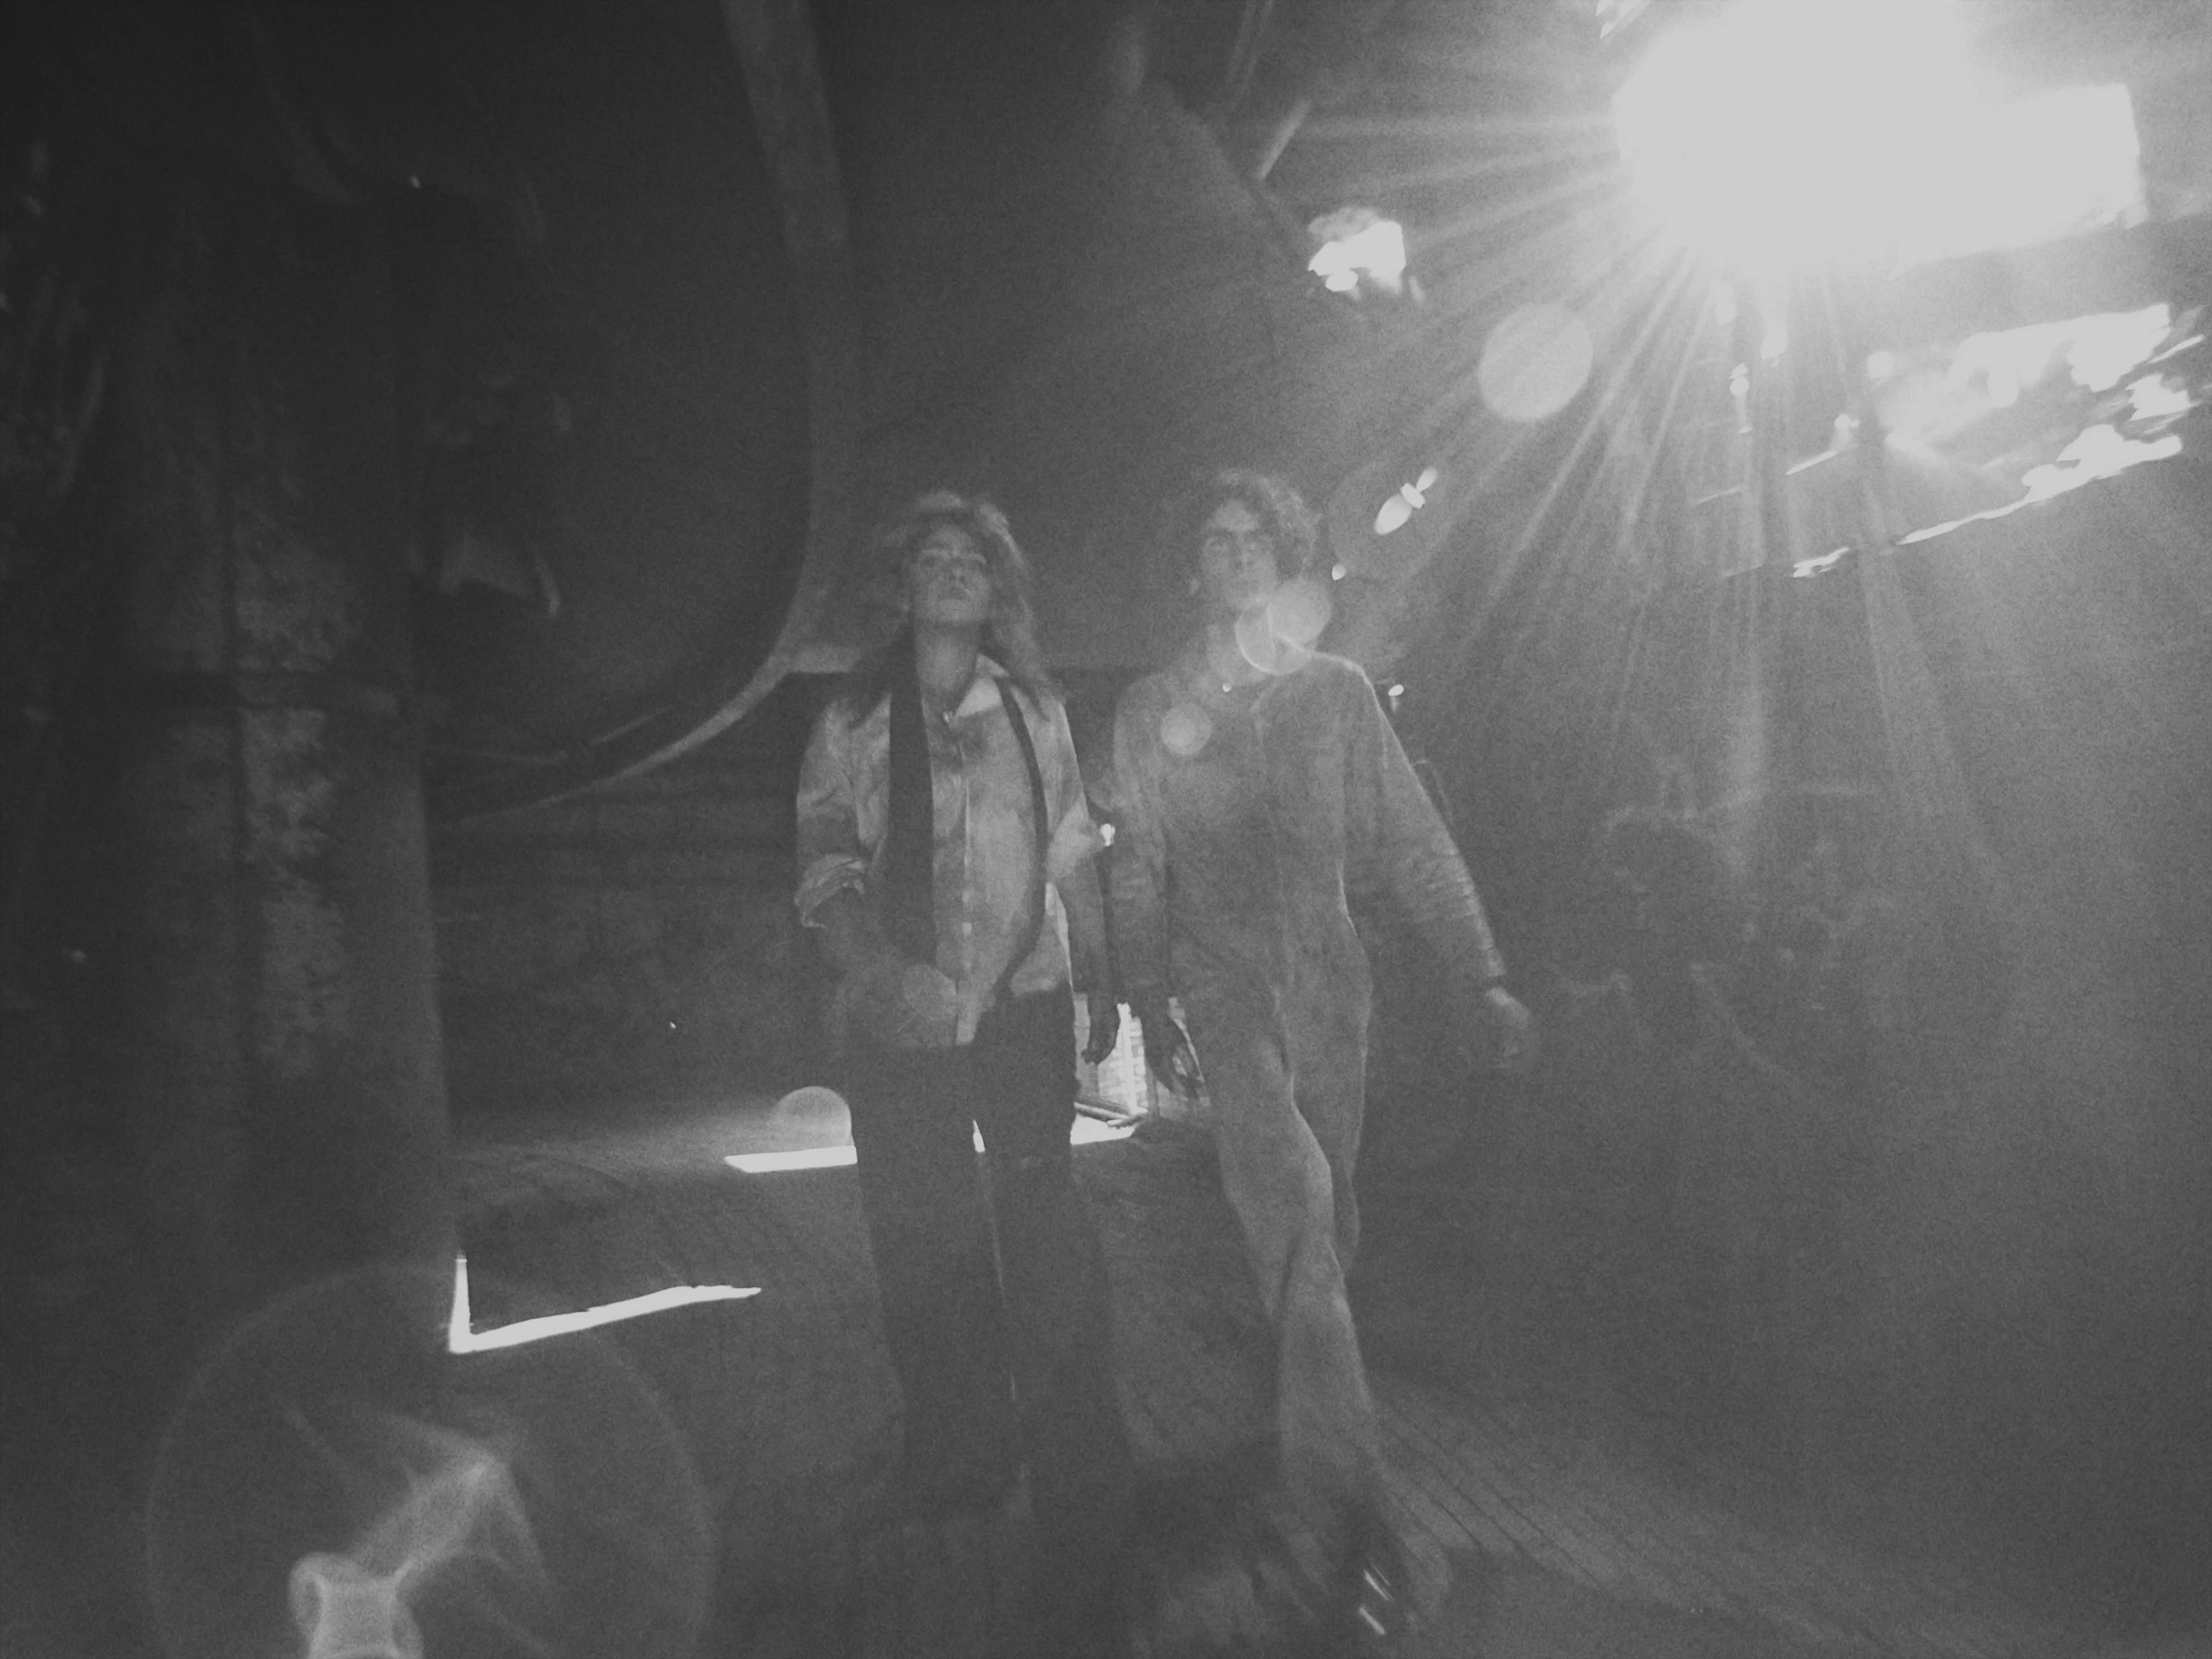 A black and white photo capturing two individuals walking through a beam of light in a dark, industrial setting. The light source, positioned at the top right corner, illuminates their figures, creating a dramatic contrast. Both individuals appear in mid-stride, one slightly ahead of the other, suggesting movement. The ambiance of the image is moody and cinematic, with the lens flare adding a raw, unfiltered quality to the moment captured.